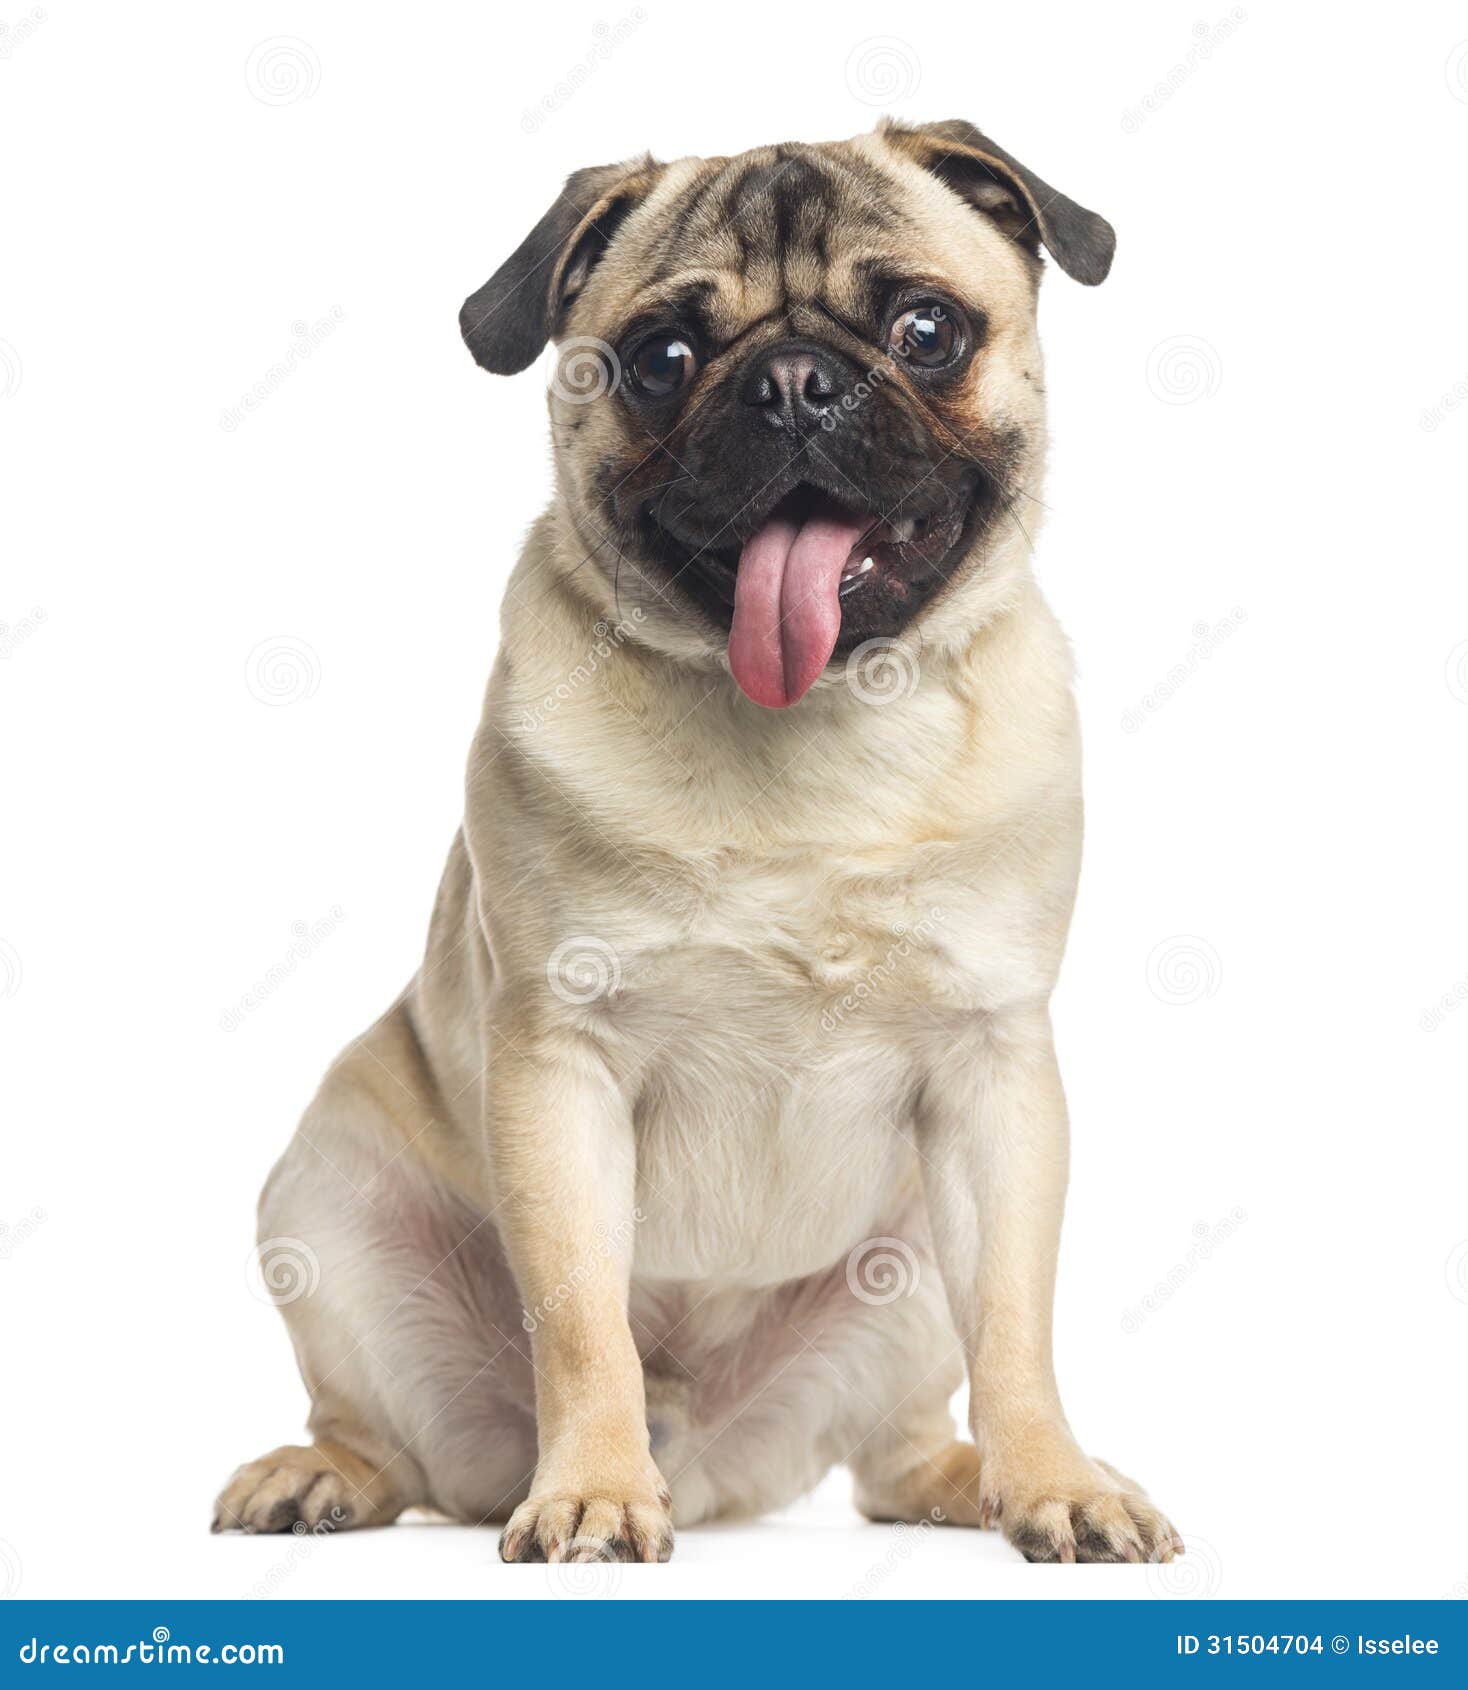 pug, sitting and panting, 1 year old